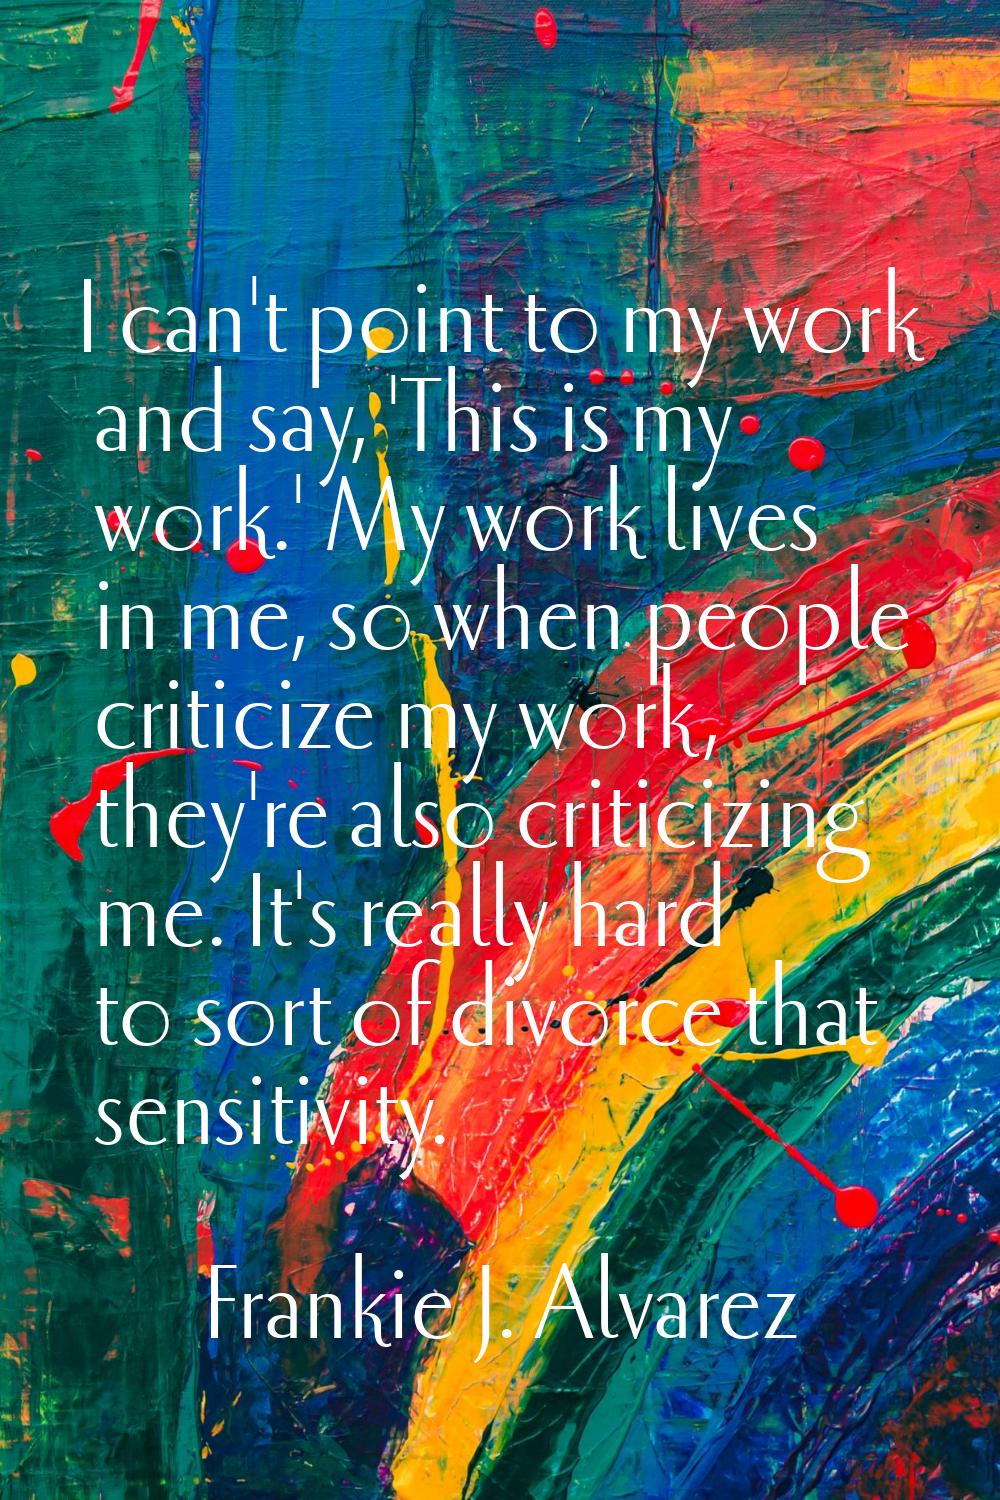 I can't point to my work and say, 'This is my work.' My work lives in me, so when people criticize 